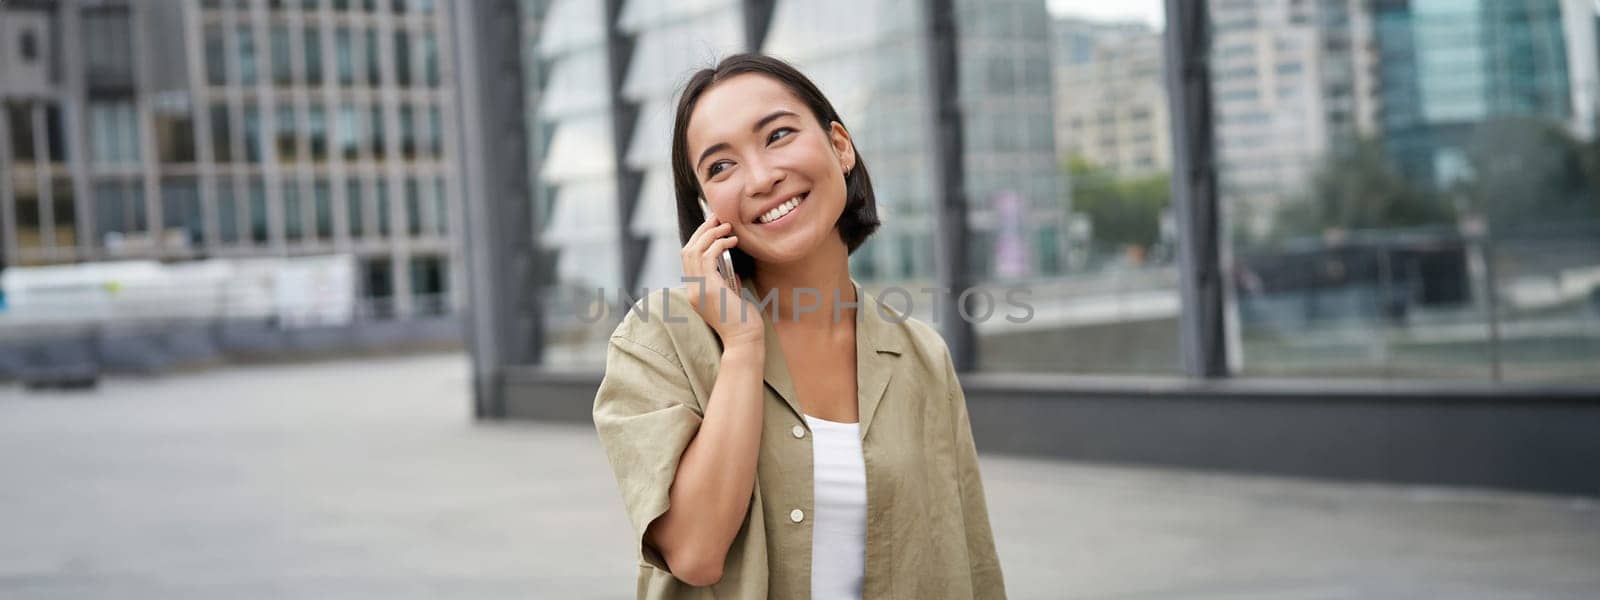 Smiling young korean girl talking on mobile phone and walking in city. Happy woman posing on street with smartphone.